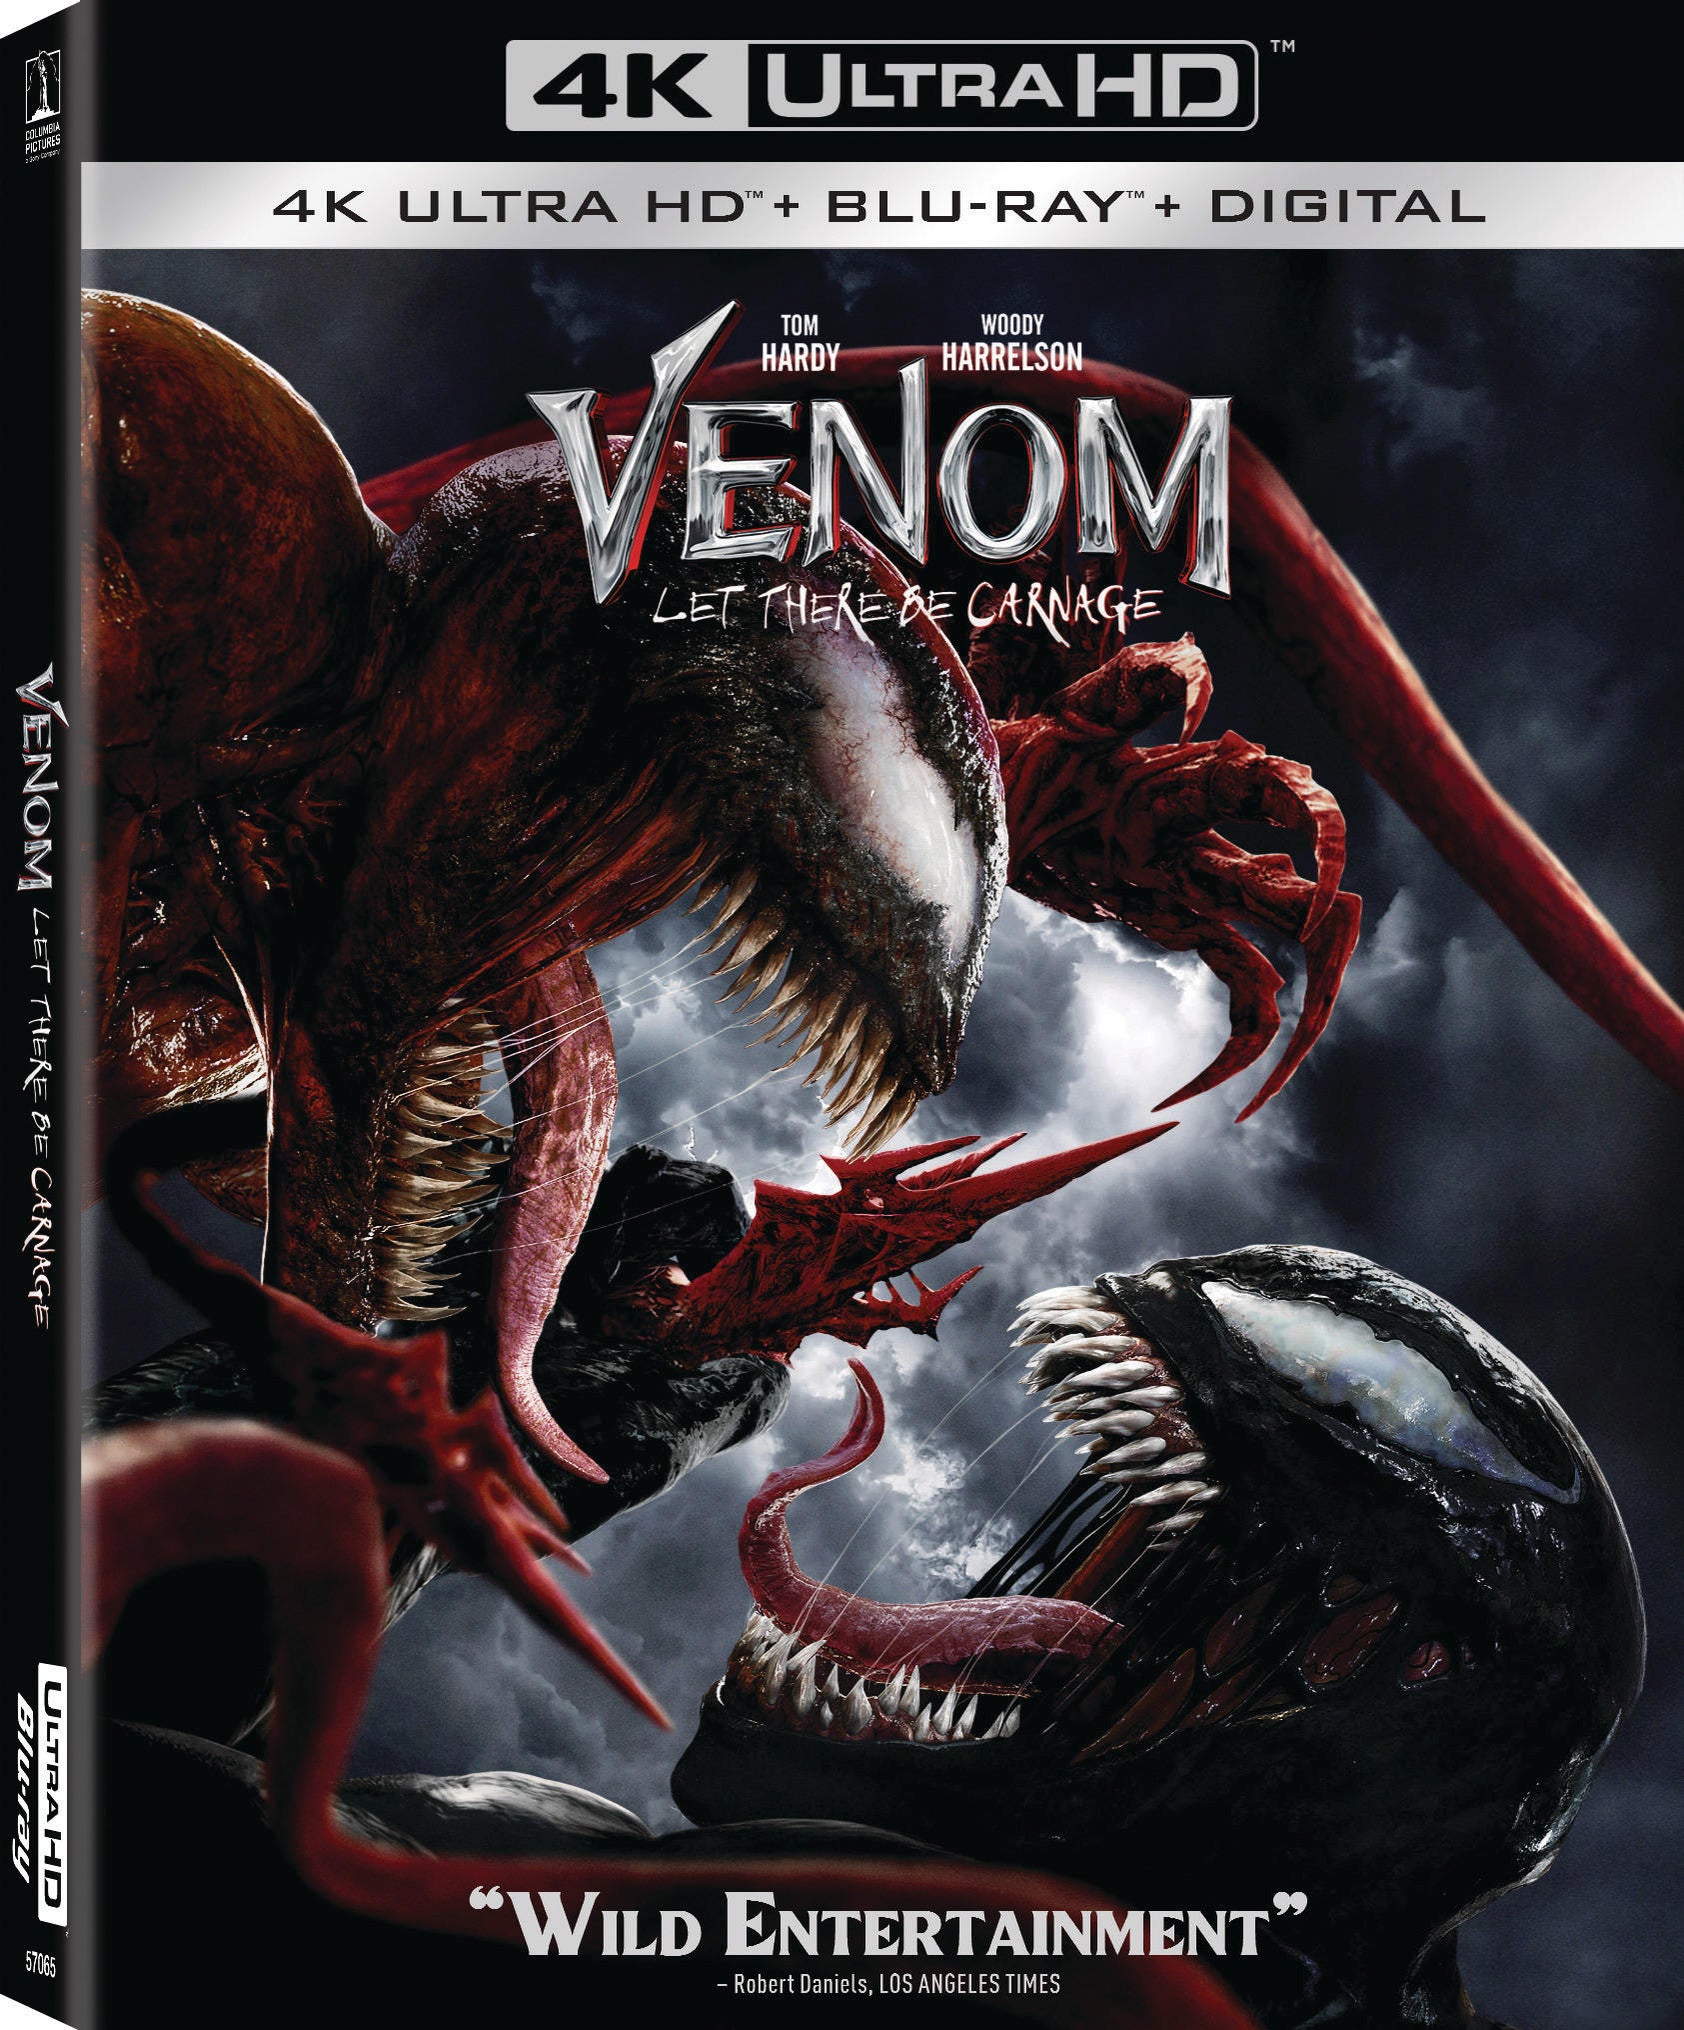 venom-let-there-be-carnage-4k-ultra-hd.jpg